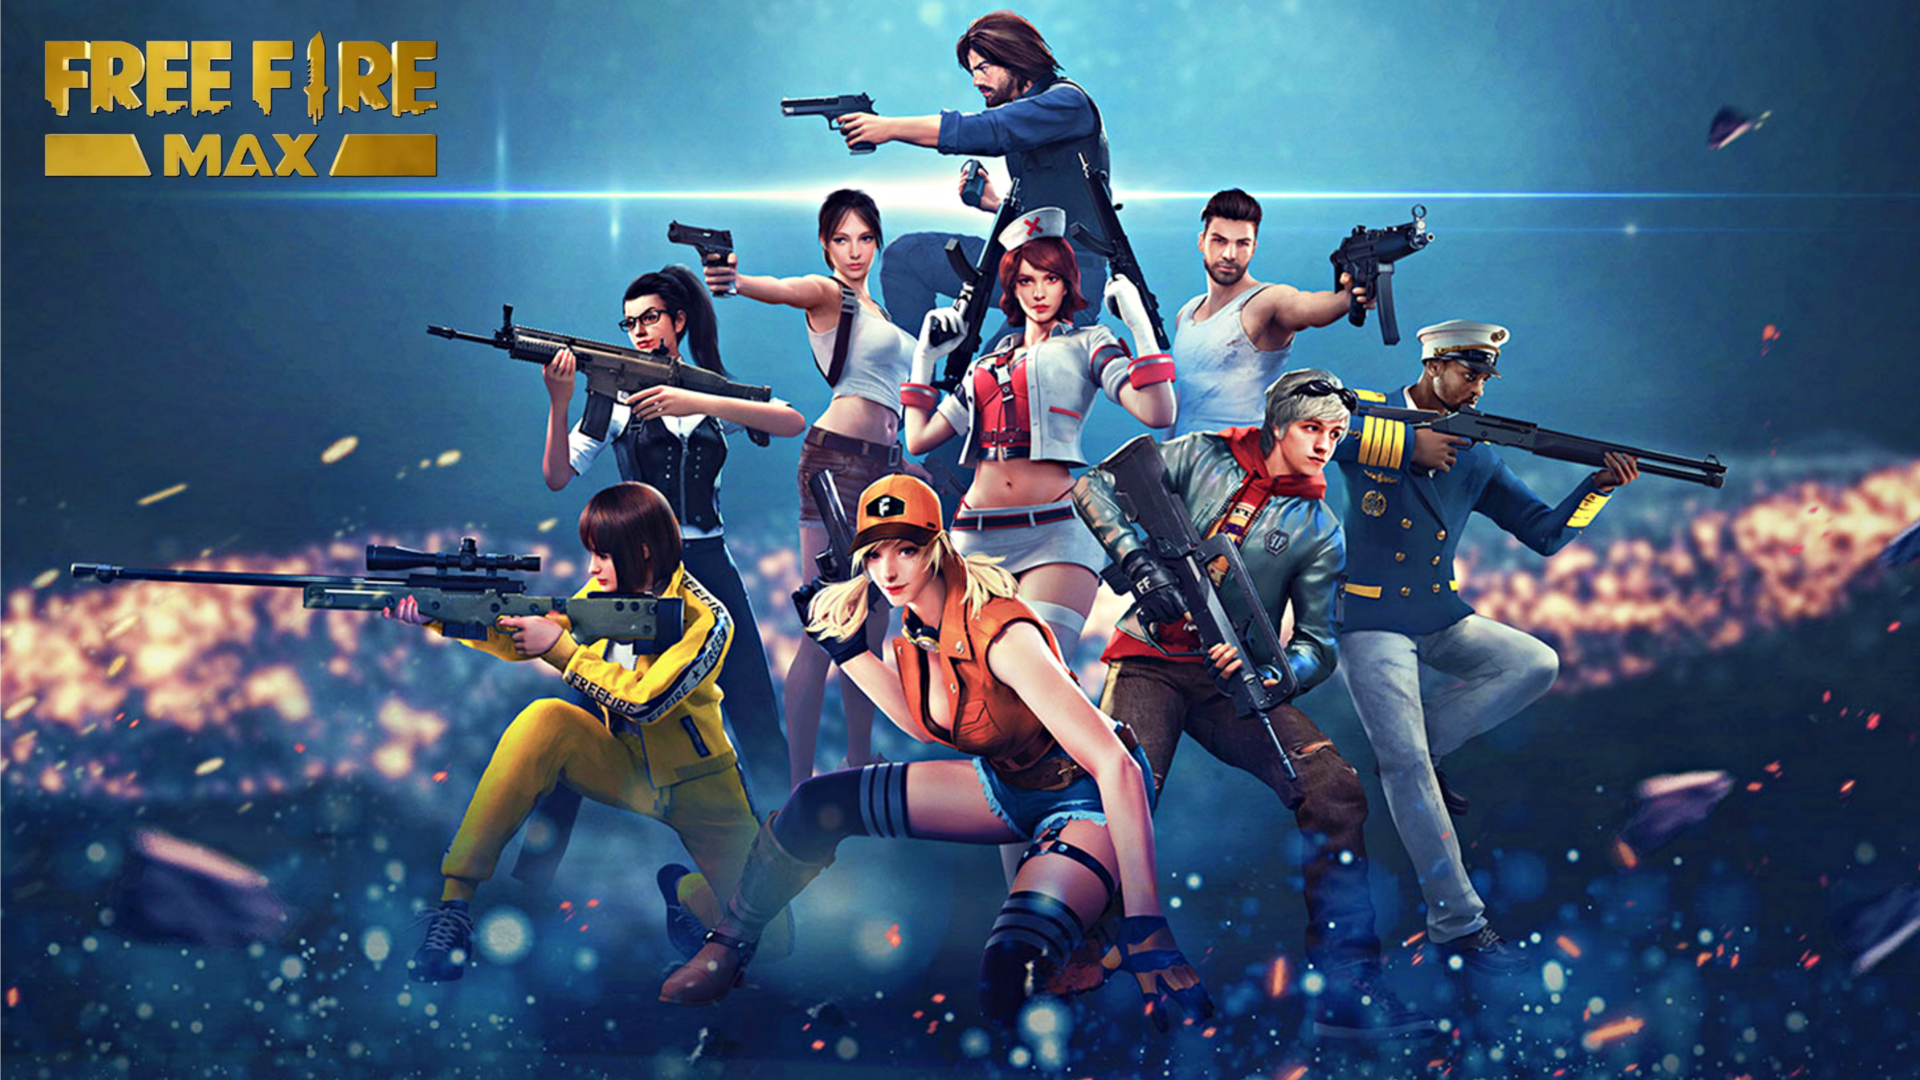 Free Fire MAX codes for February 12: How to redeem